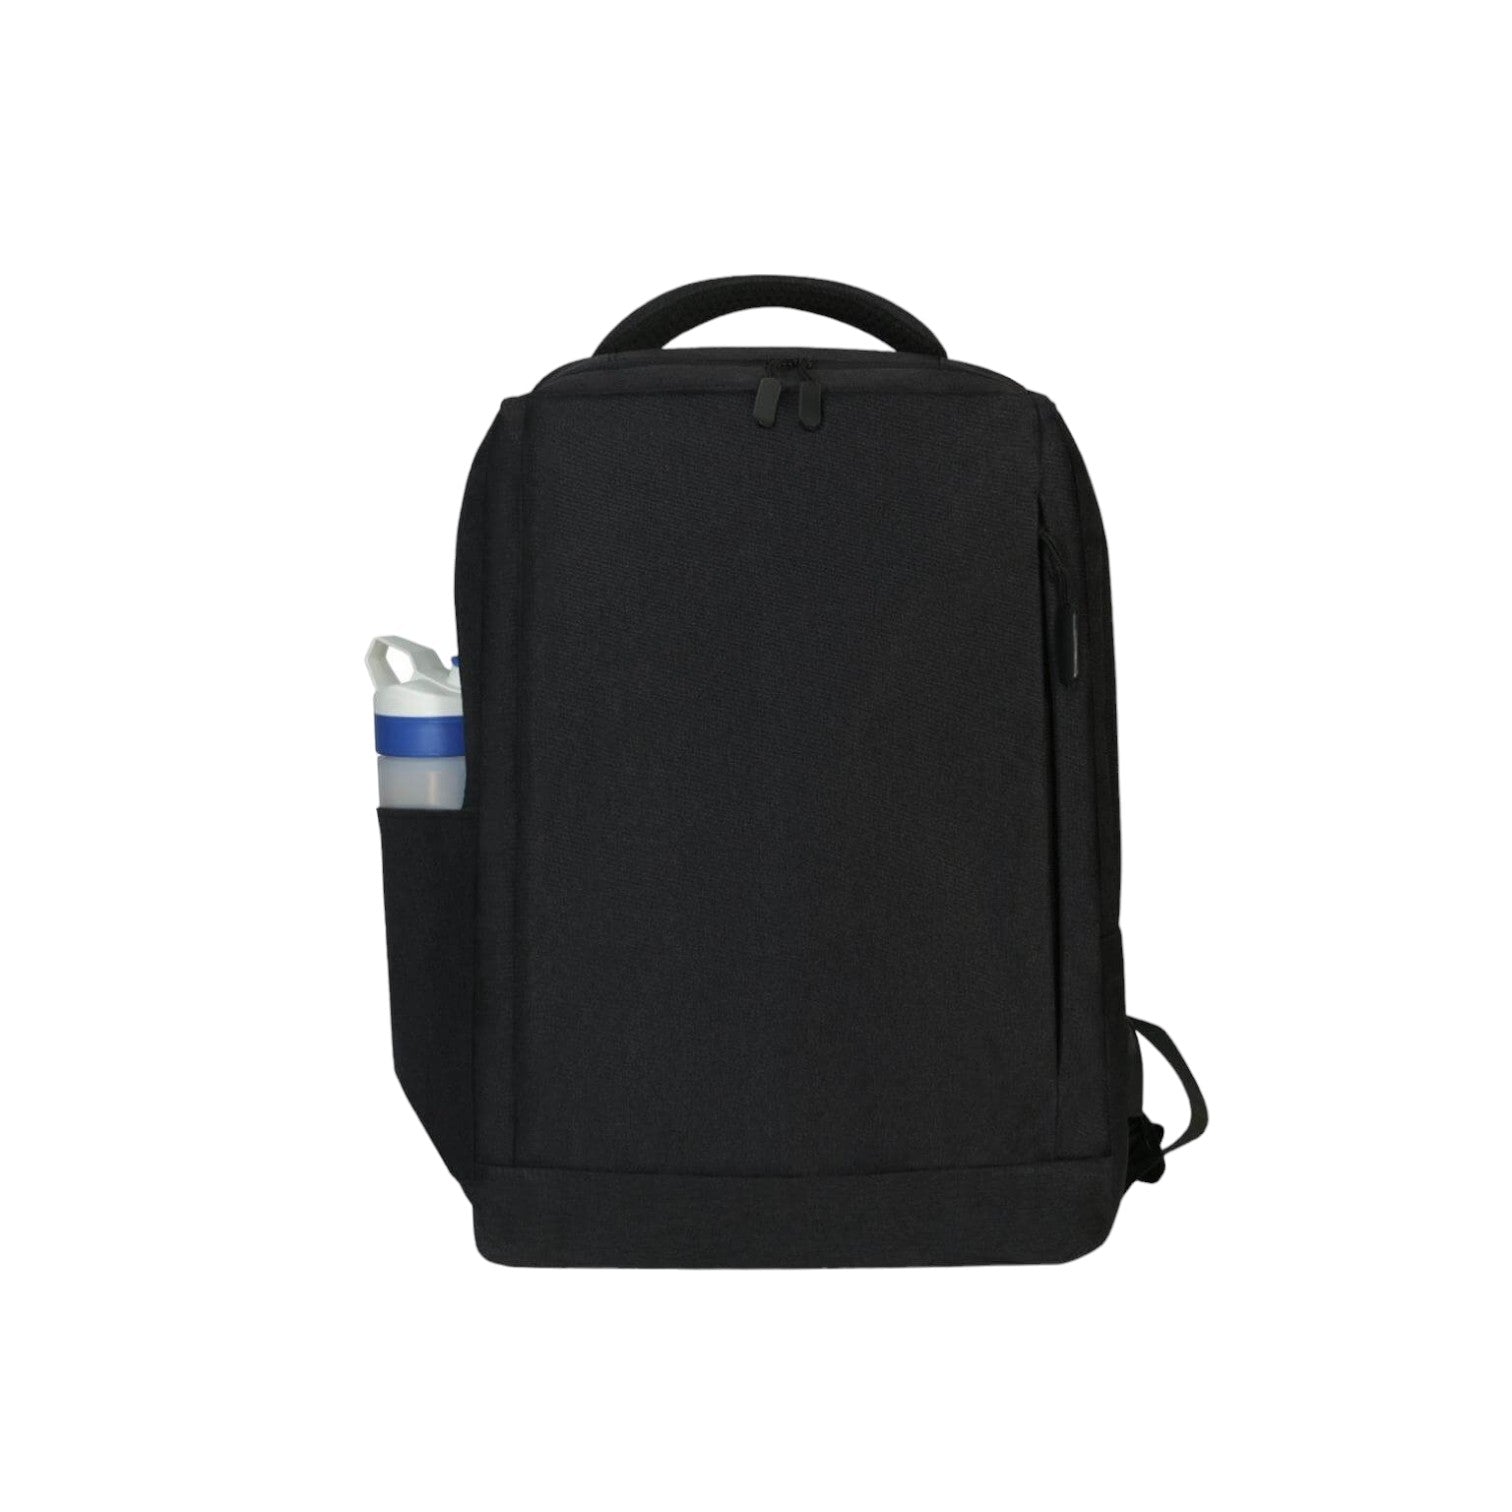 GRS-certified Recycled RPET Backpack - Black